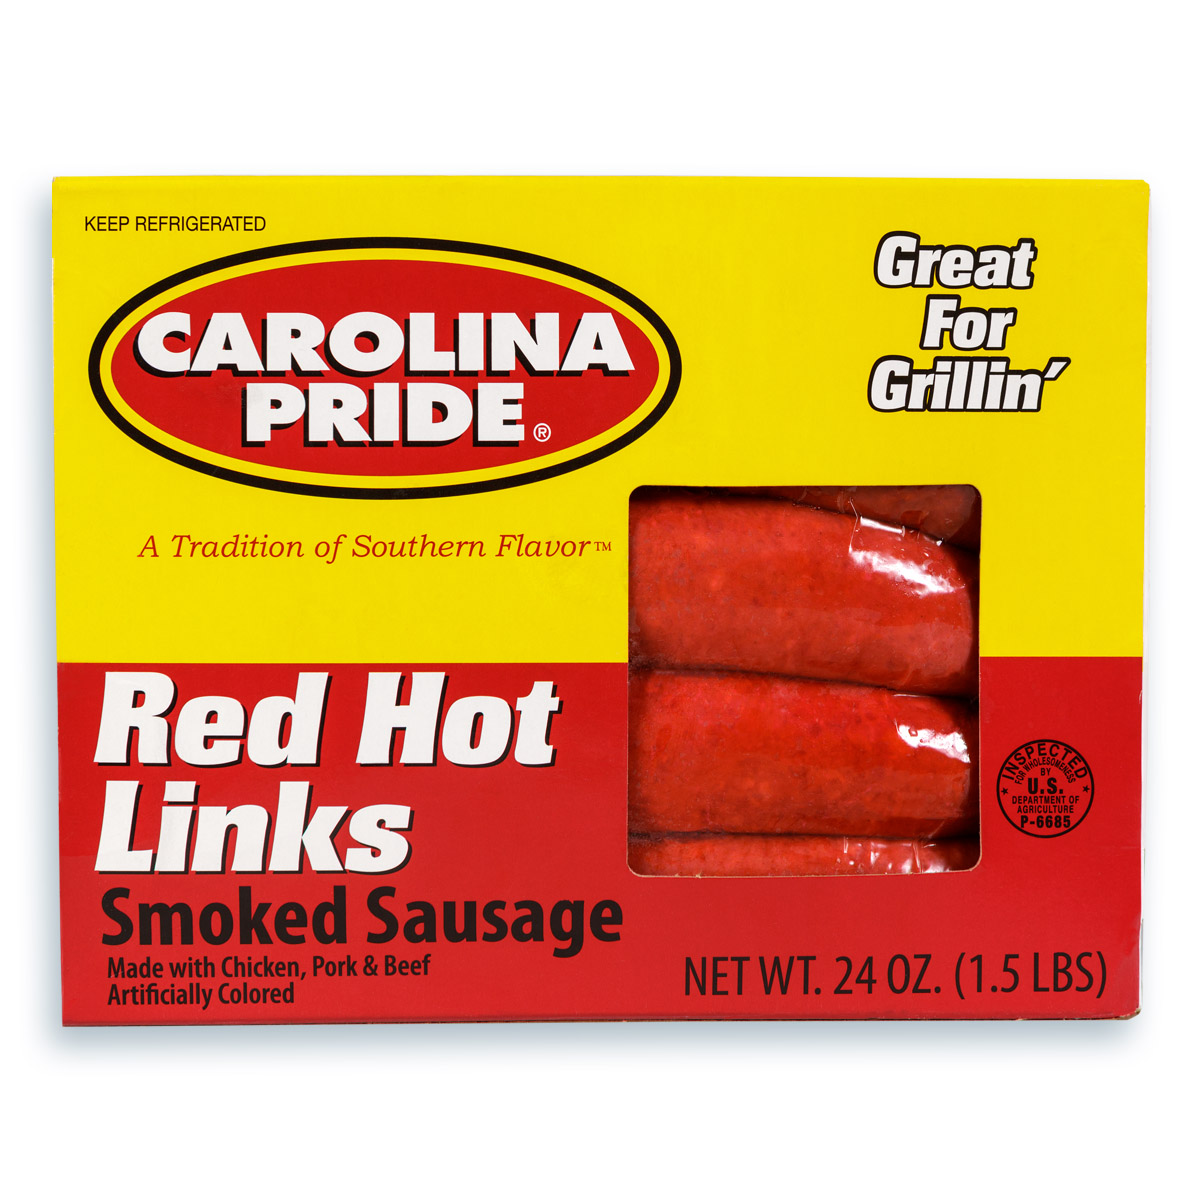 Red Hot Links Smoked Sausage 3627,Best Chuck Steak Recipes